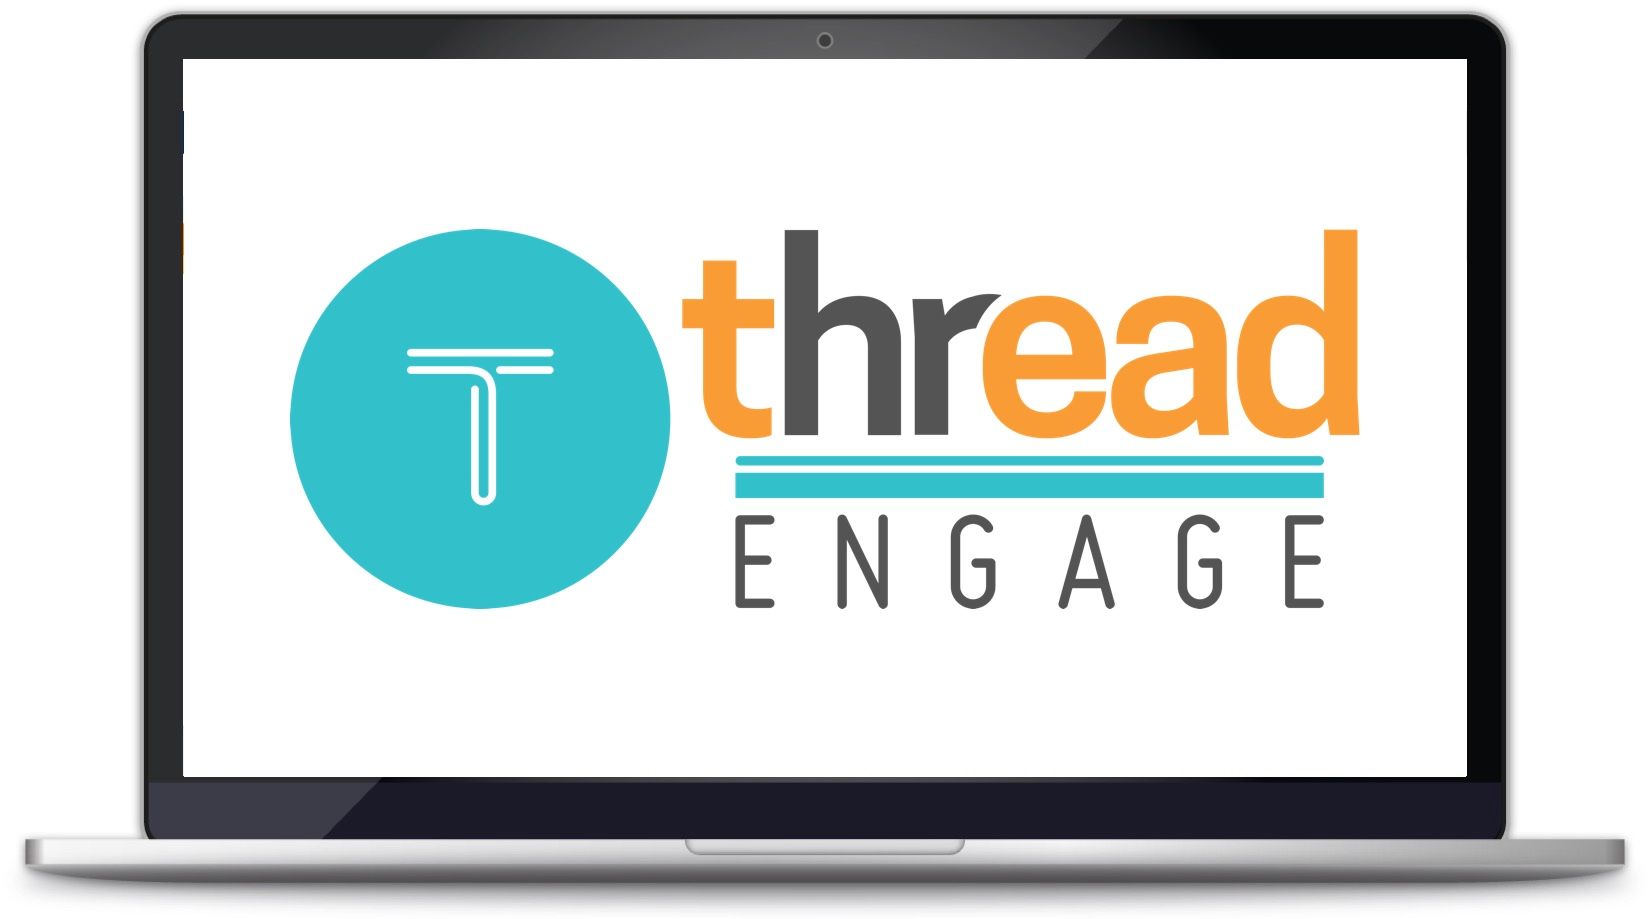 Thread ENGAGE: Human Resources Consulting